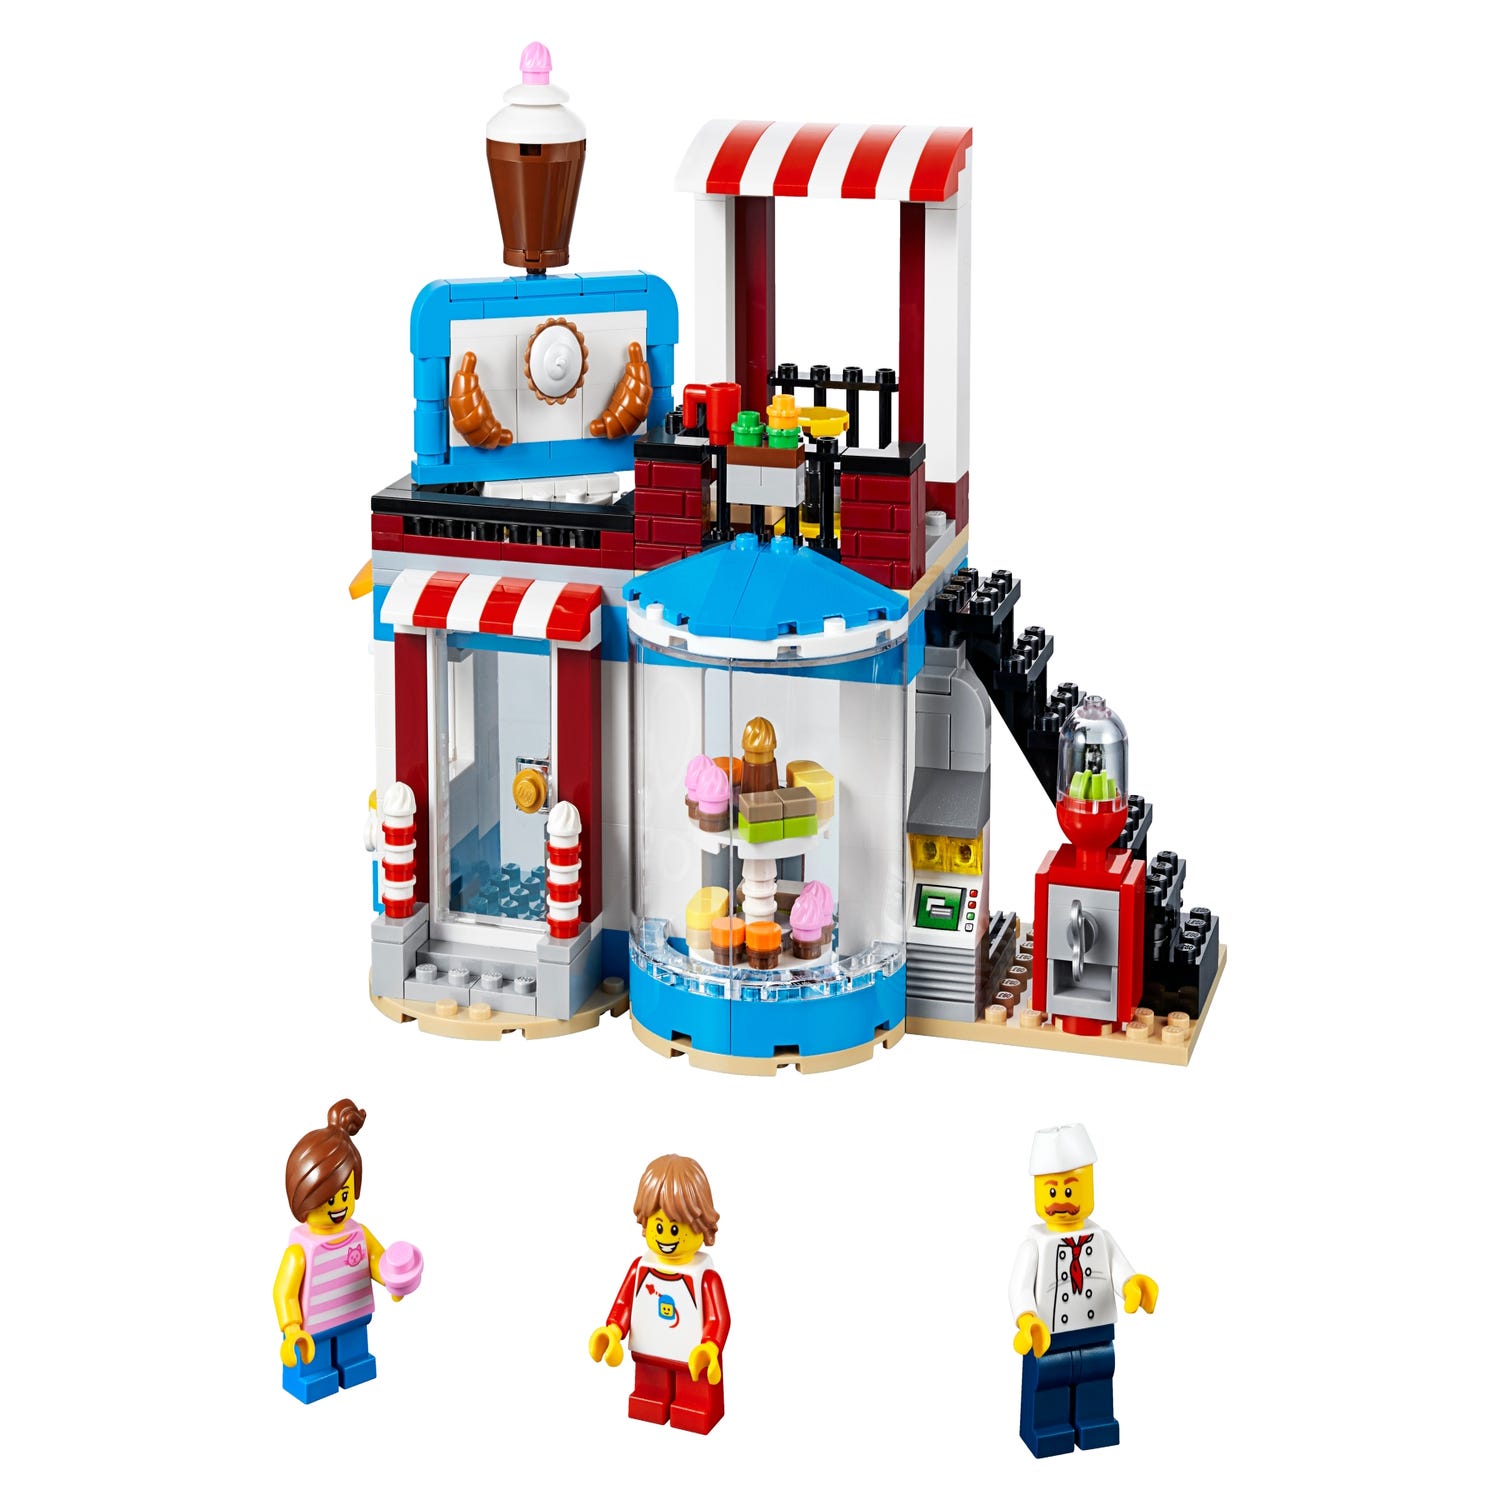 Modular Sweet Surprises 31077 | 3-in-1 | Buy at the Official LEGO® Shop US